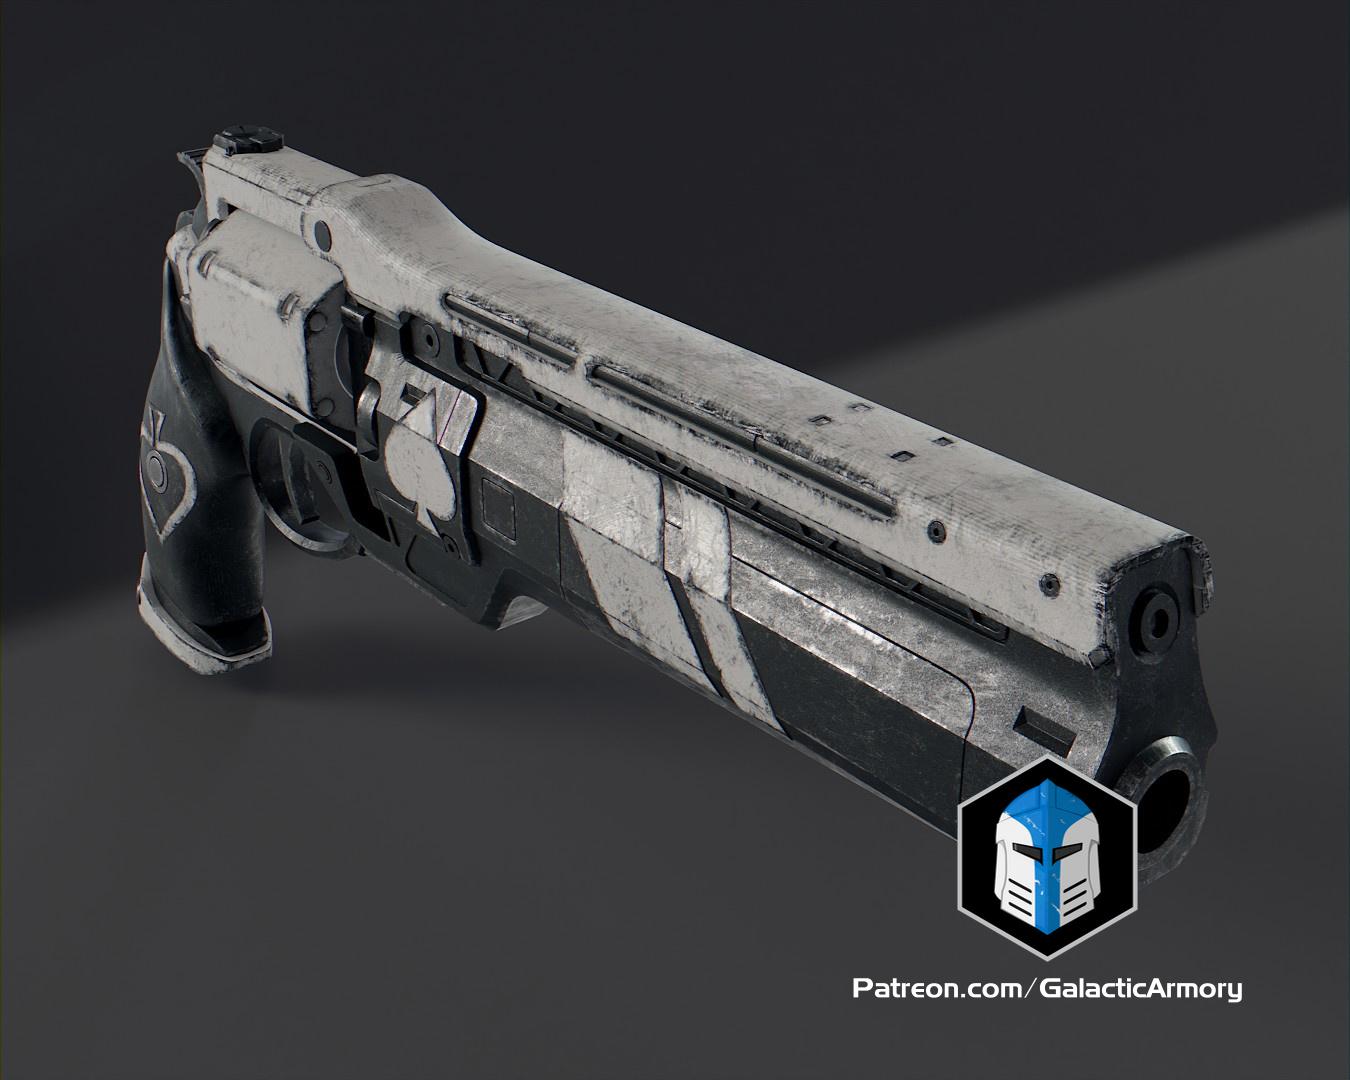 [New Files!] The Ace of Spades Destiny hand cannon files have been added to the February rewards!